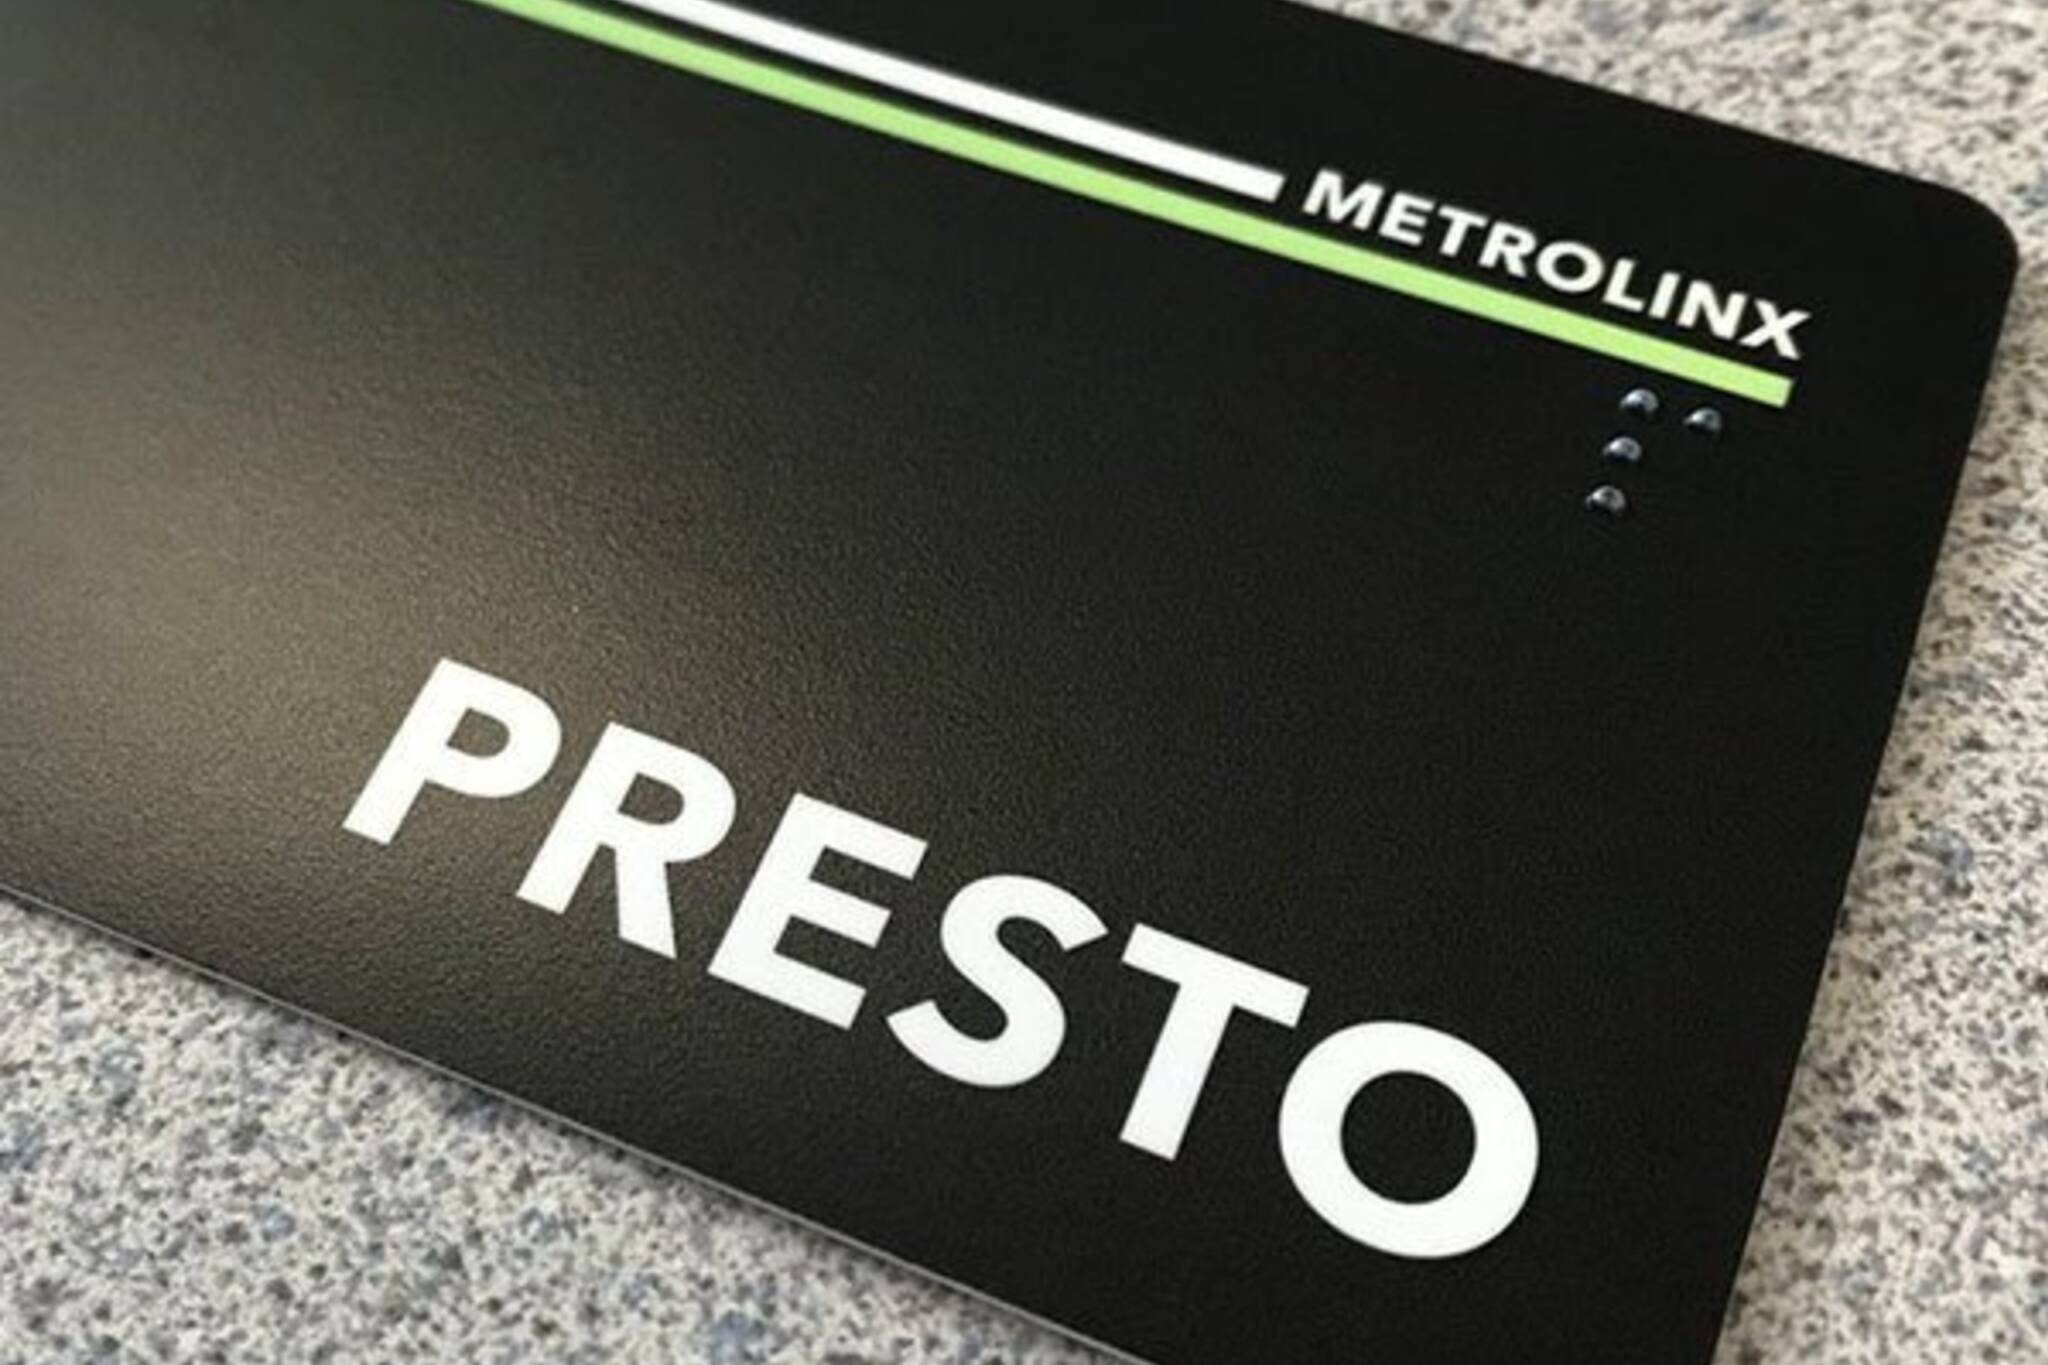 ttc-to-distribute-free-presto-cards-this-summer-and-fall